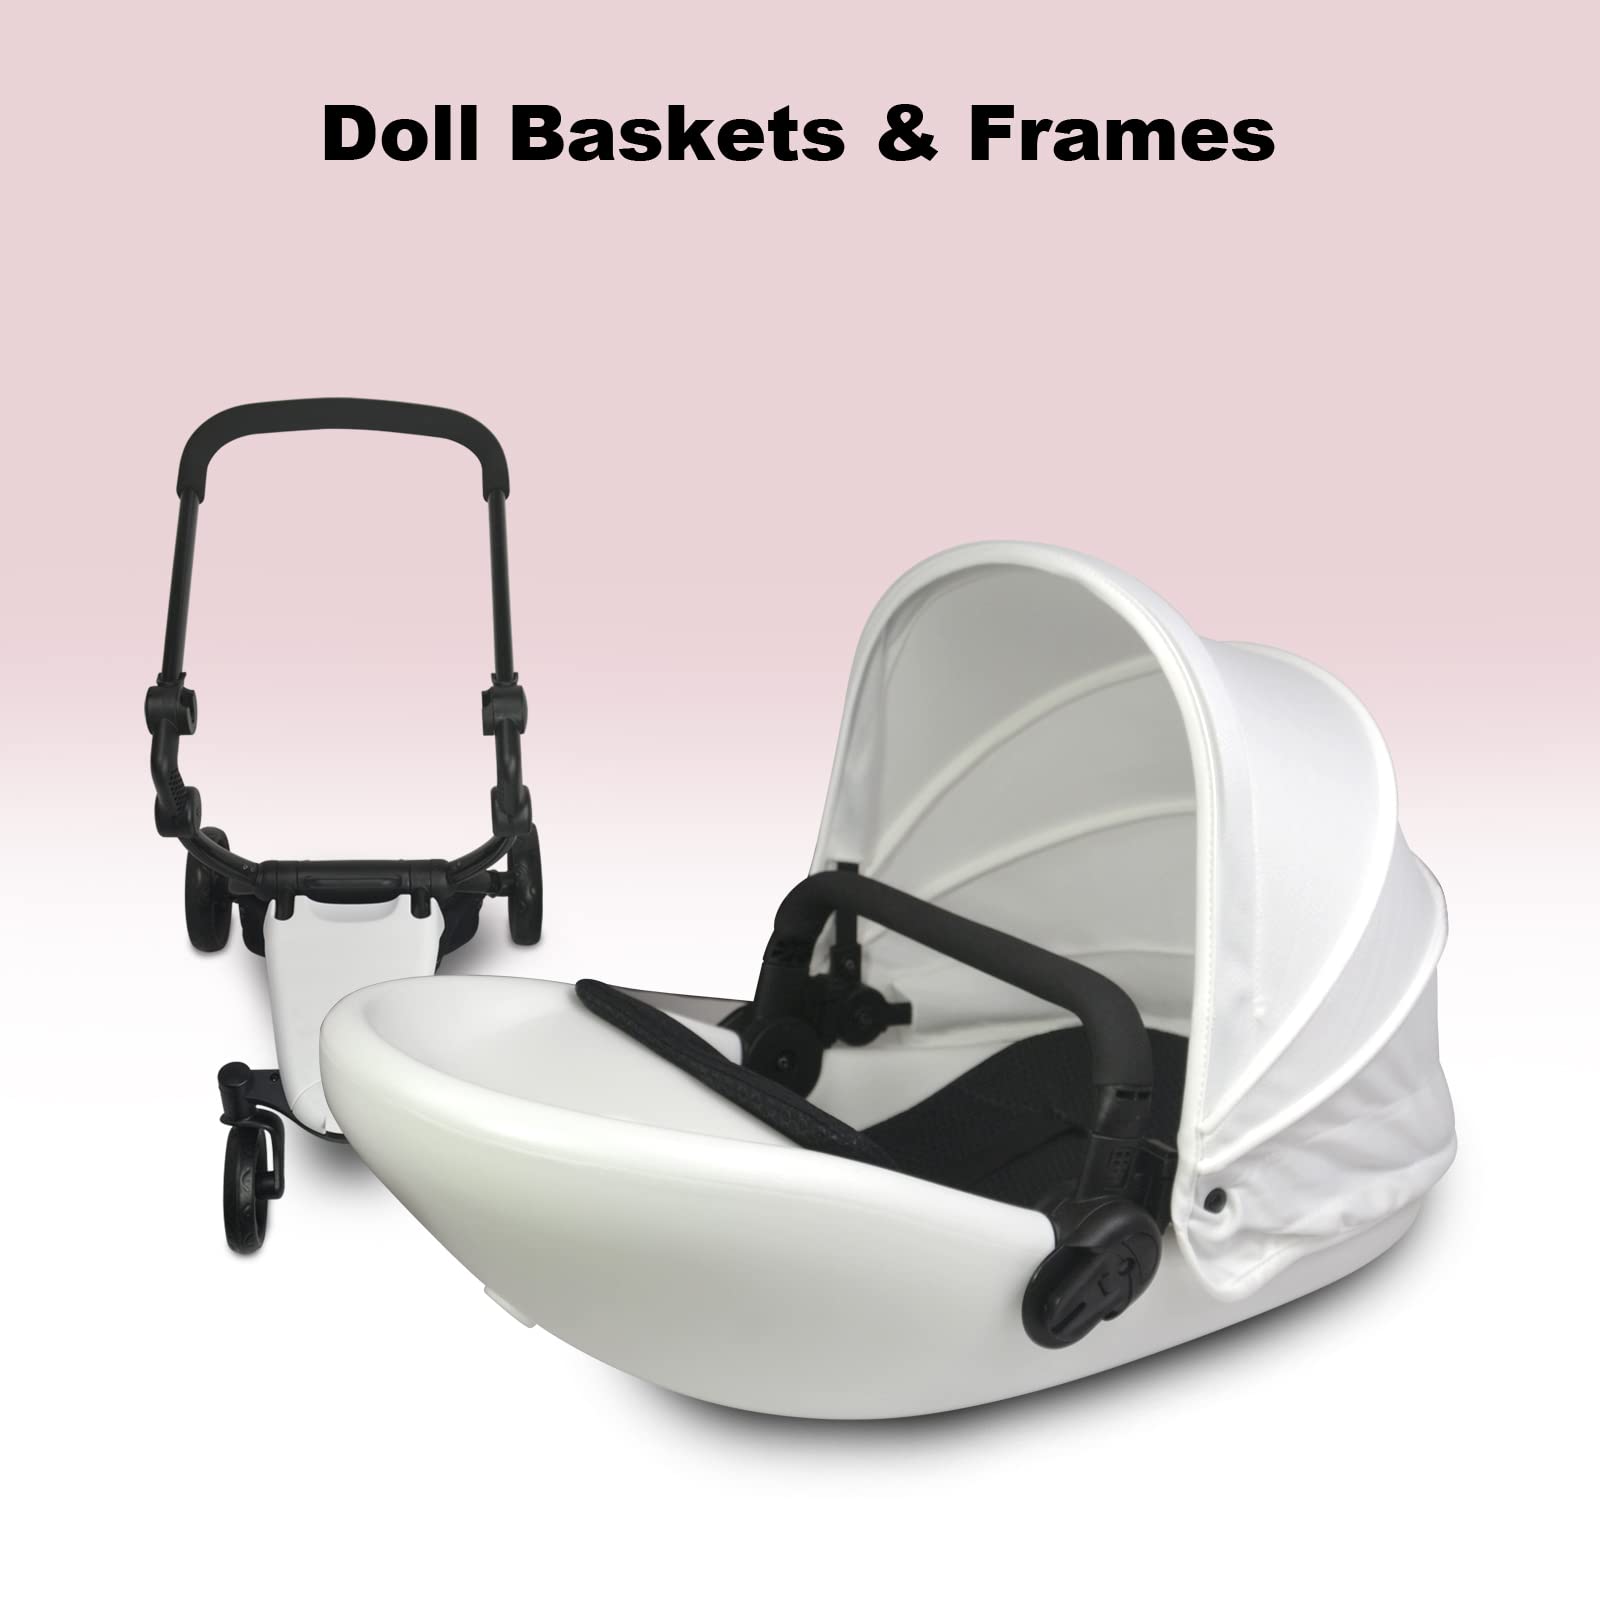 Anivia Luxury Baby Doll Stroller for 18